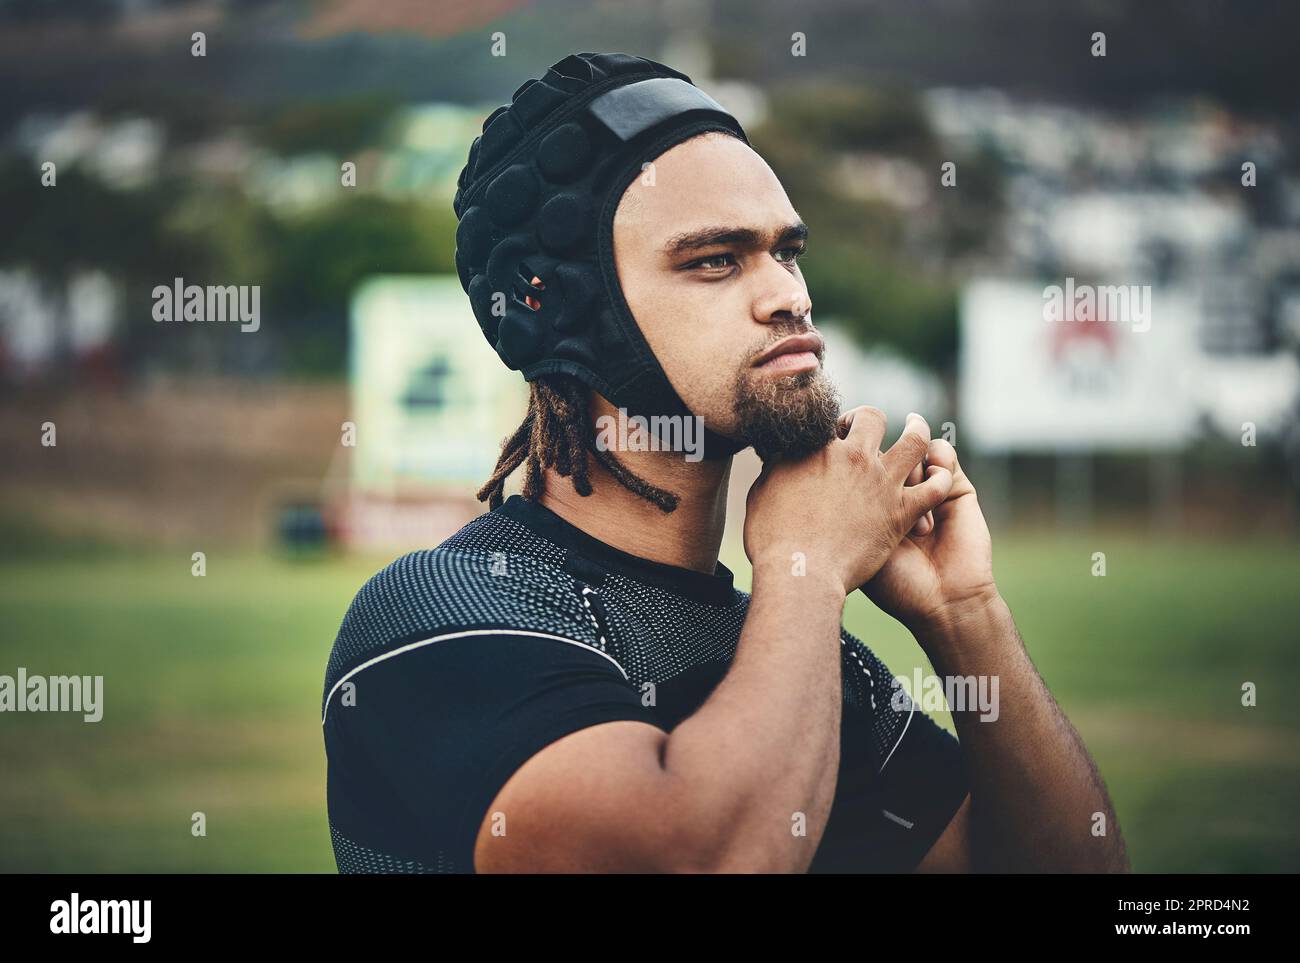 Getting ready to tackle the game ahead. a handsome young rugby player adjusting his headgear while standing on the field during the day. Stock Photo